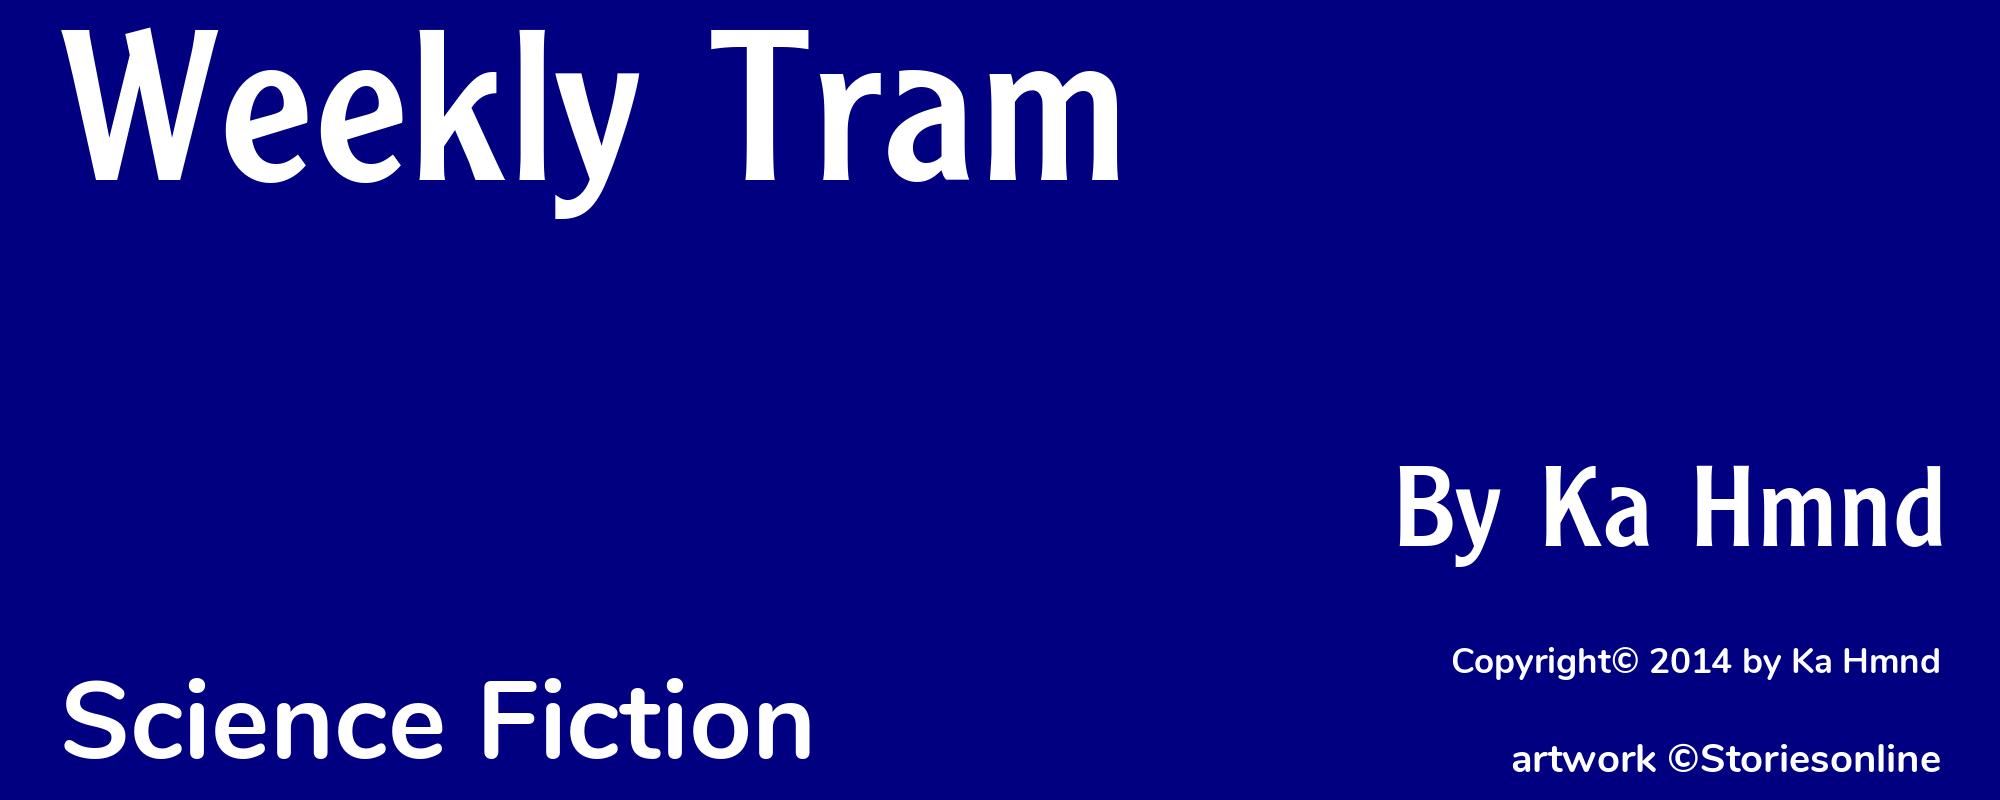 Weekly Tram - Cover